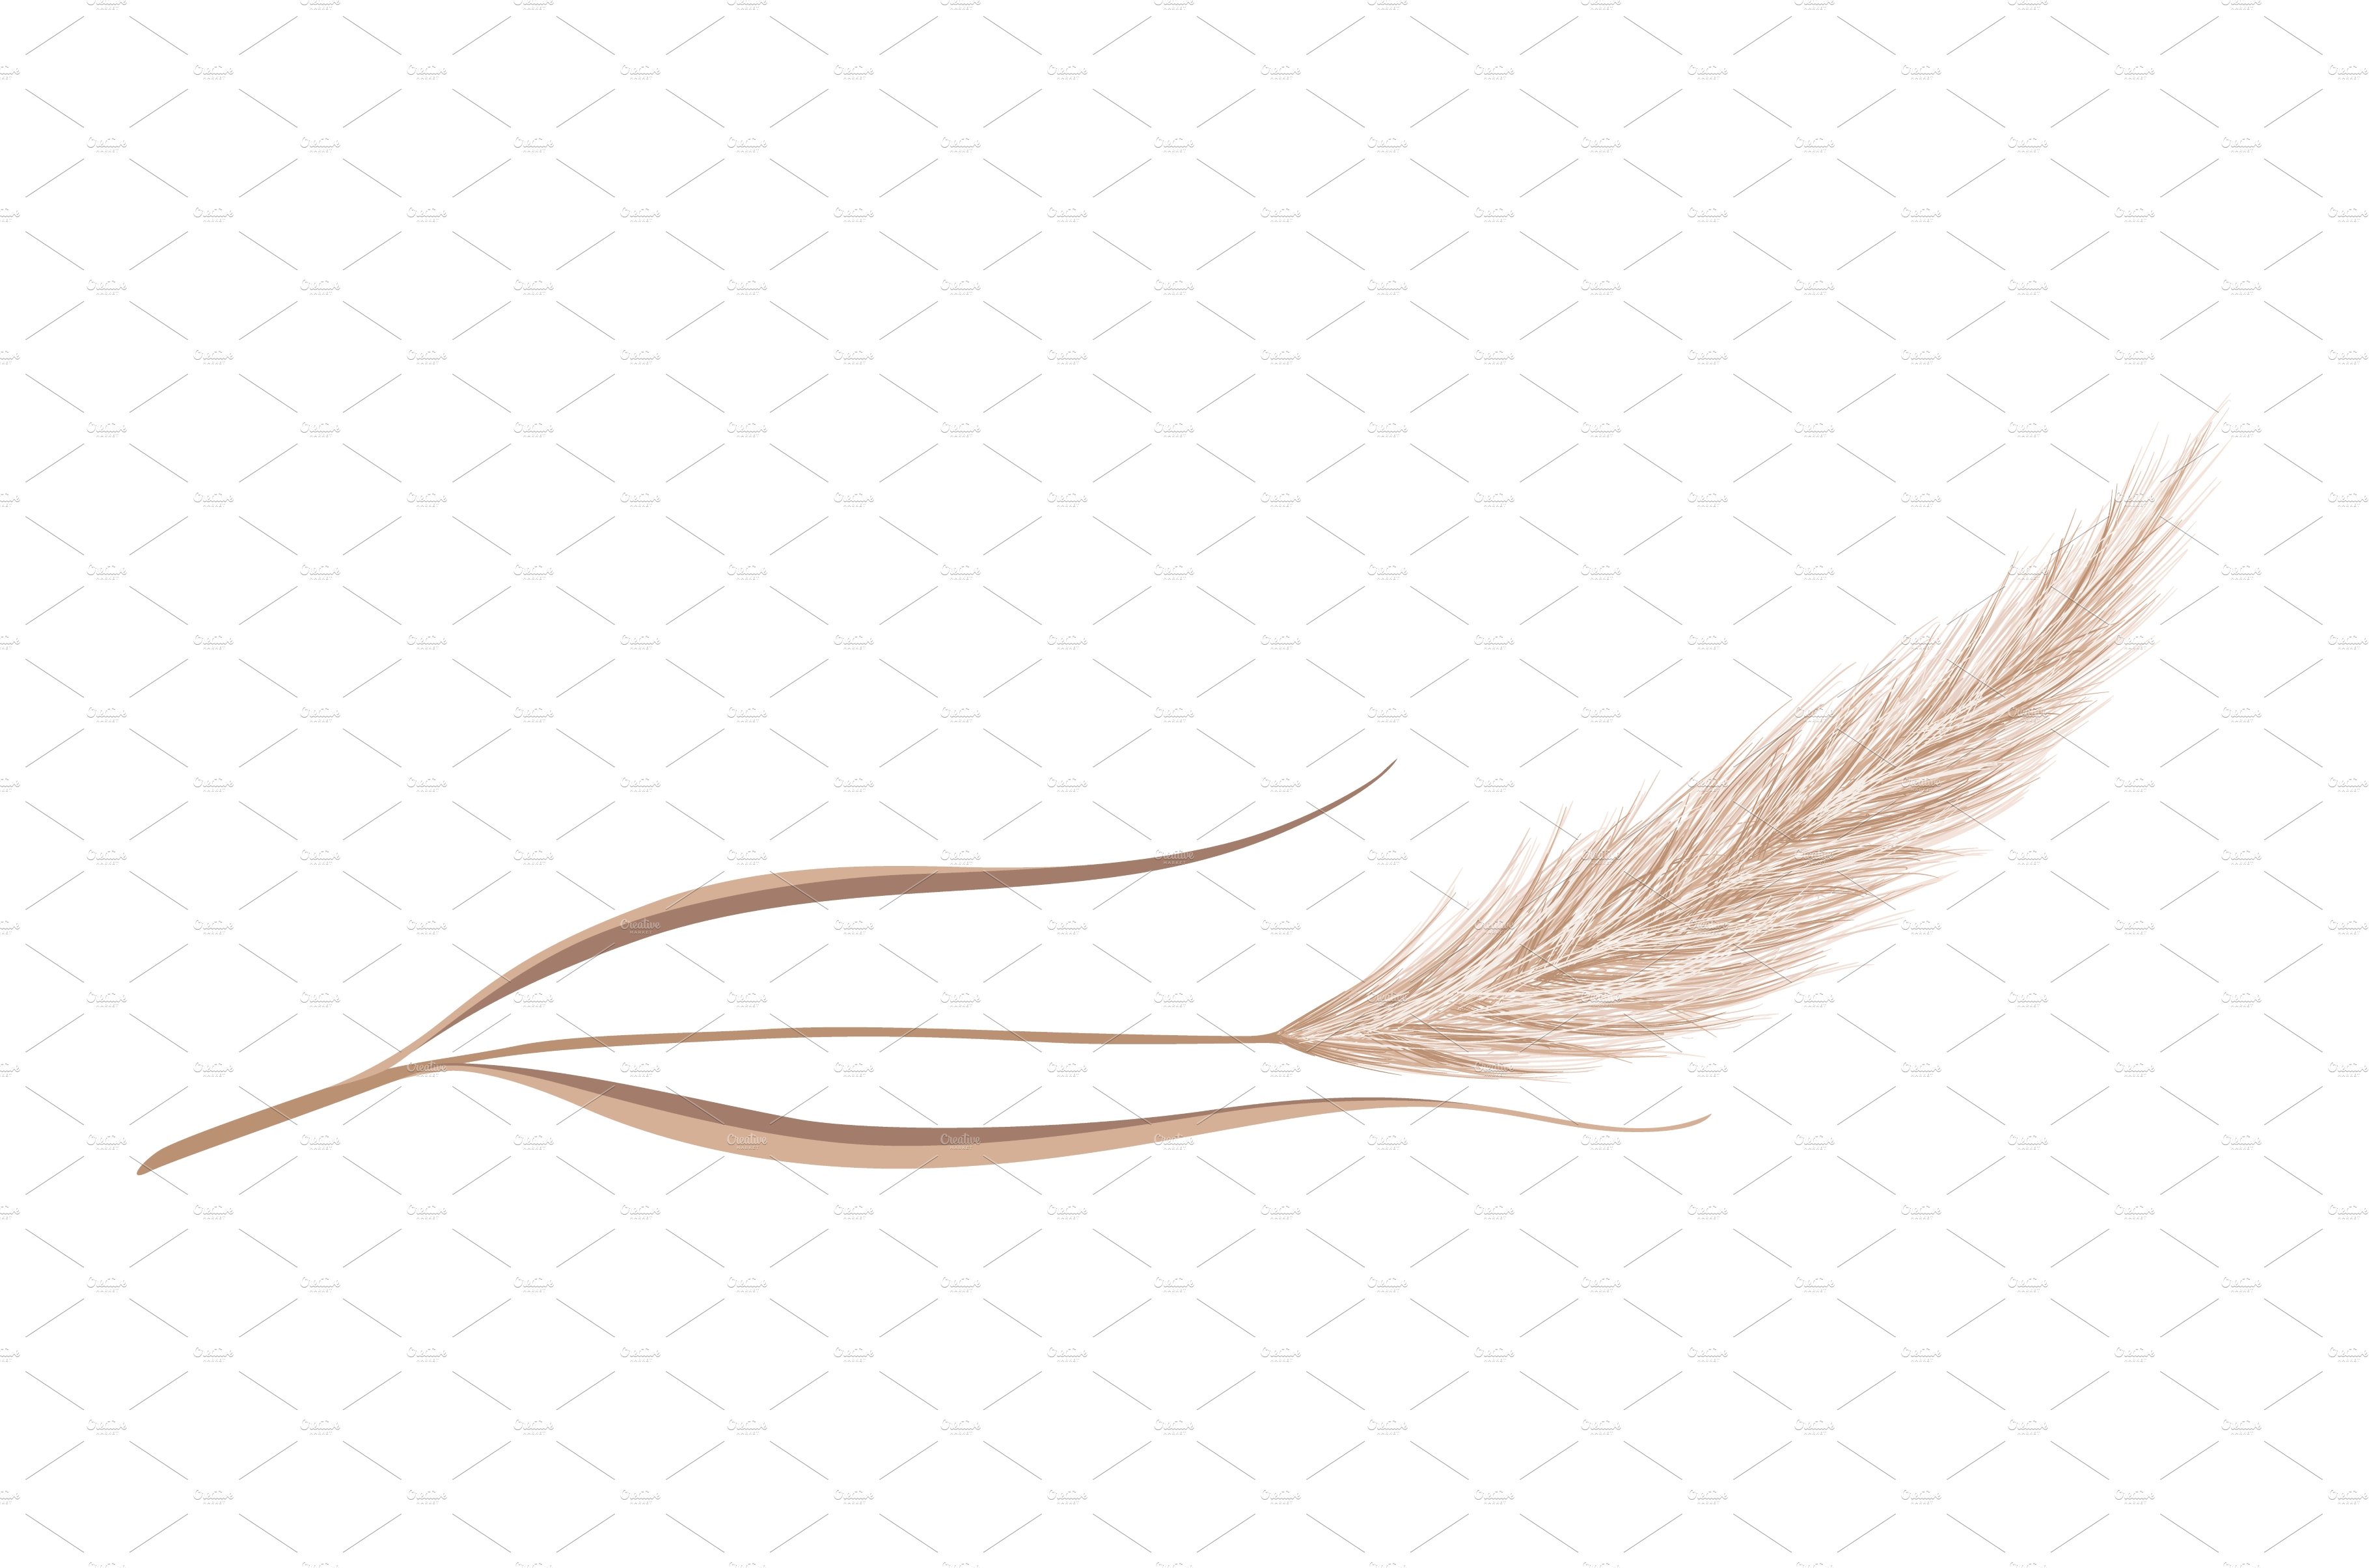 Single feather on a white background.